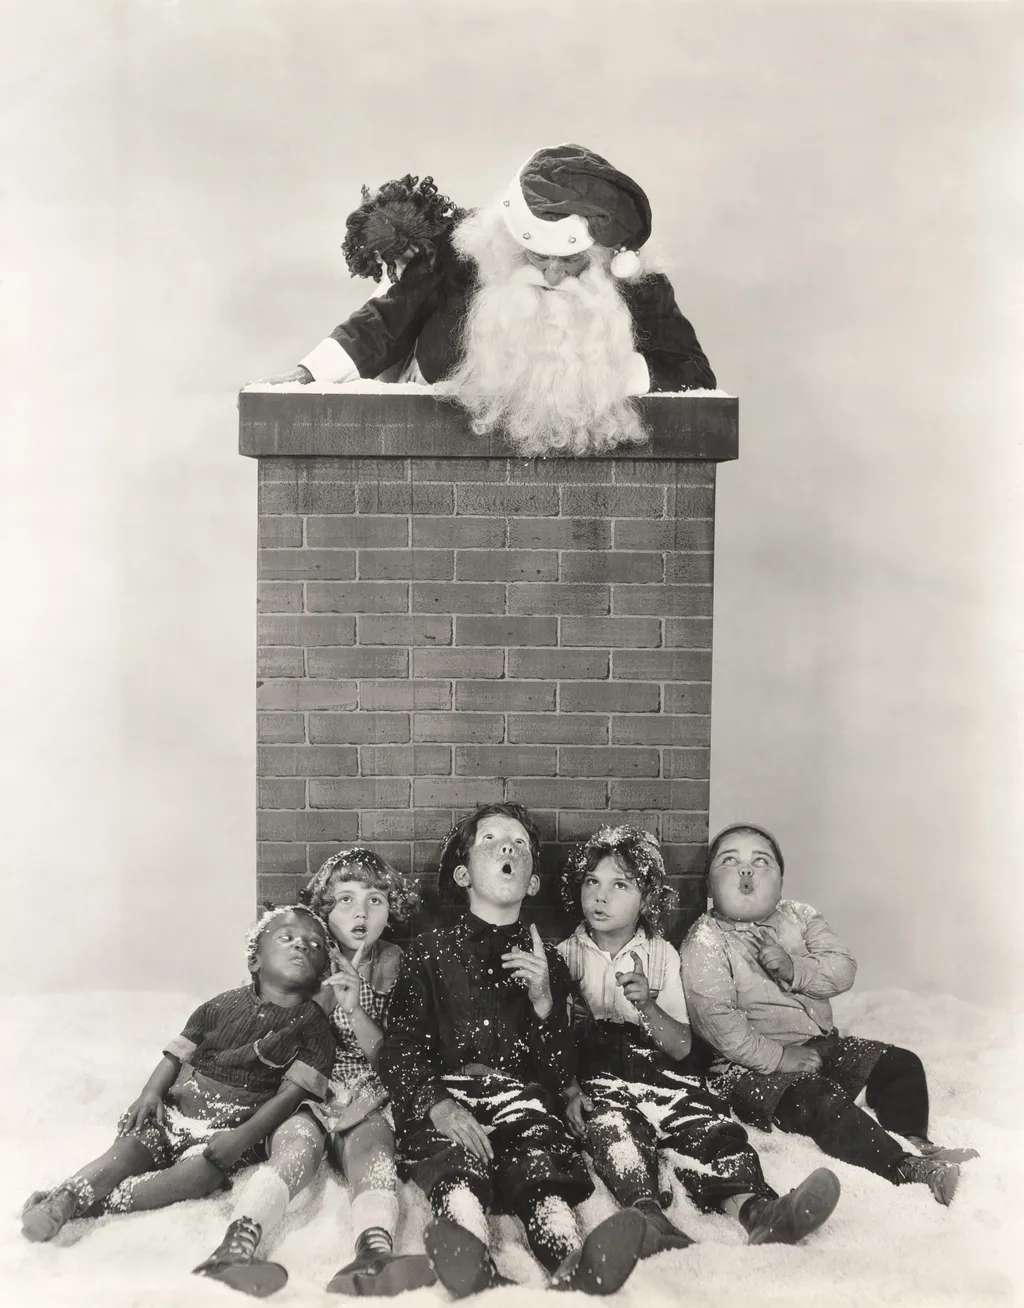 Children,Sitting,Against,Chimney,Looking,At,Santa,Claus 1920s,1910s,1940s,chimney,boys,historical,togetherness,winter,ve 